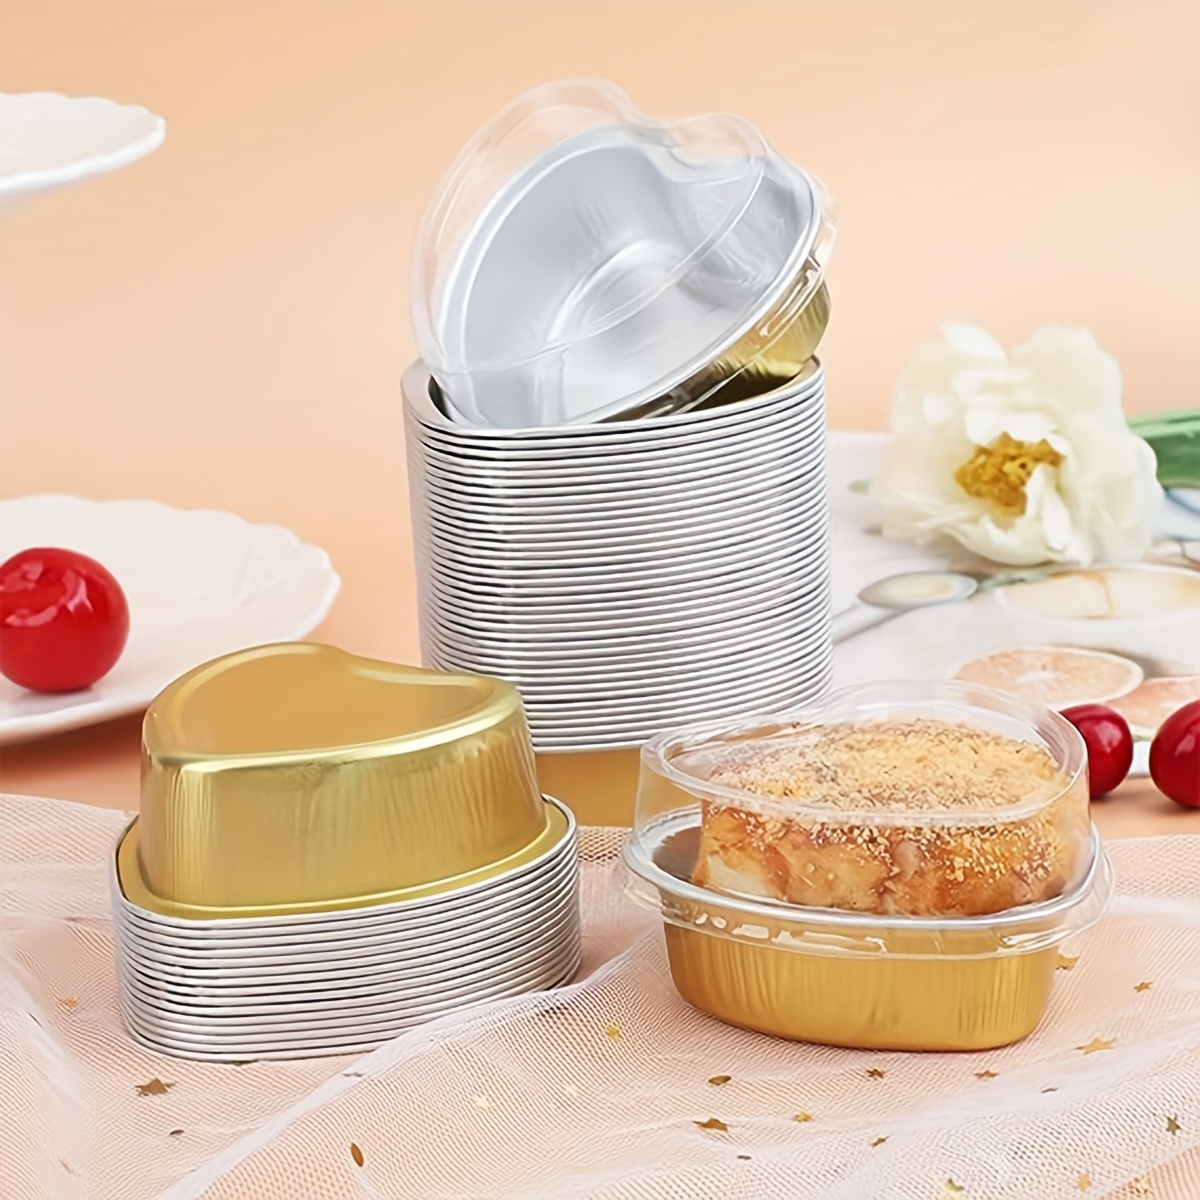 50 Pcs Aluminum Foil Mini Square Baking Cups with Lids,5oz Disposable  Ramekins Cake Pans,Cupcake Baking Cups Containers for Bread Muffin Brownie